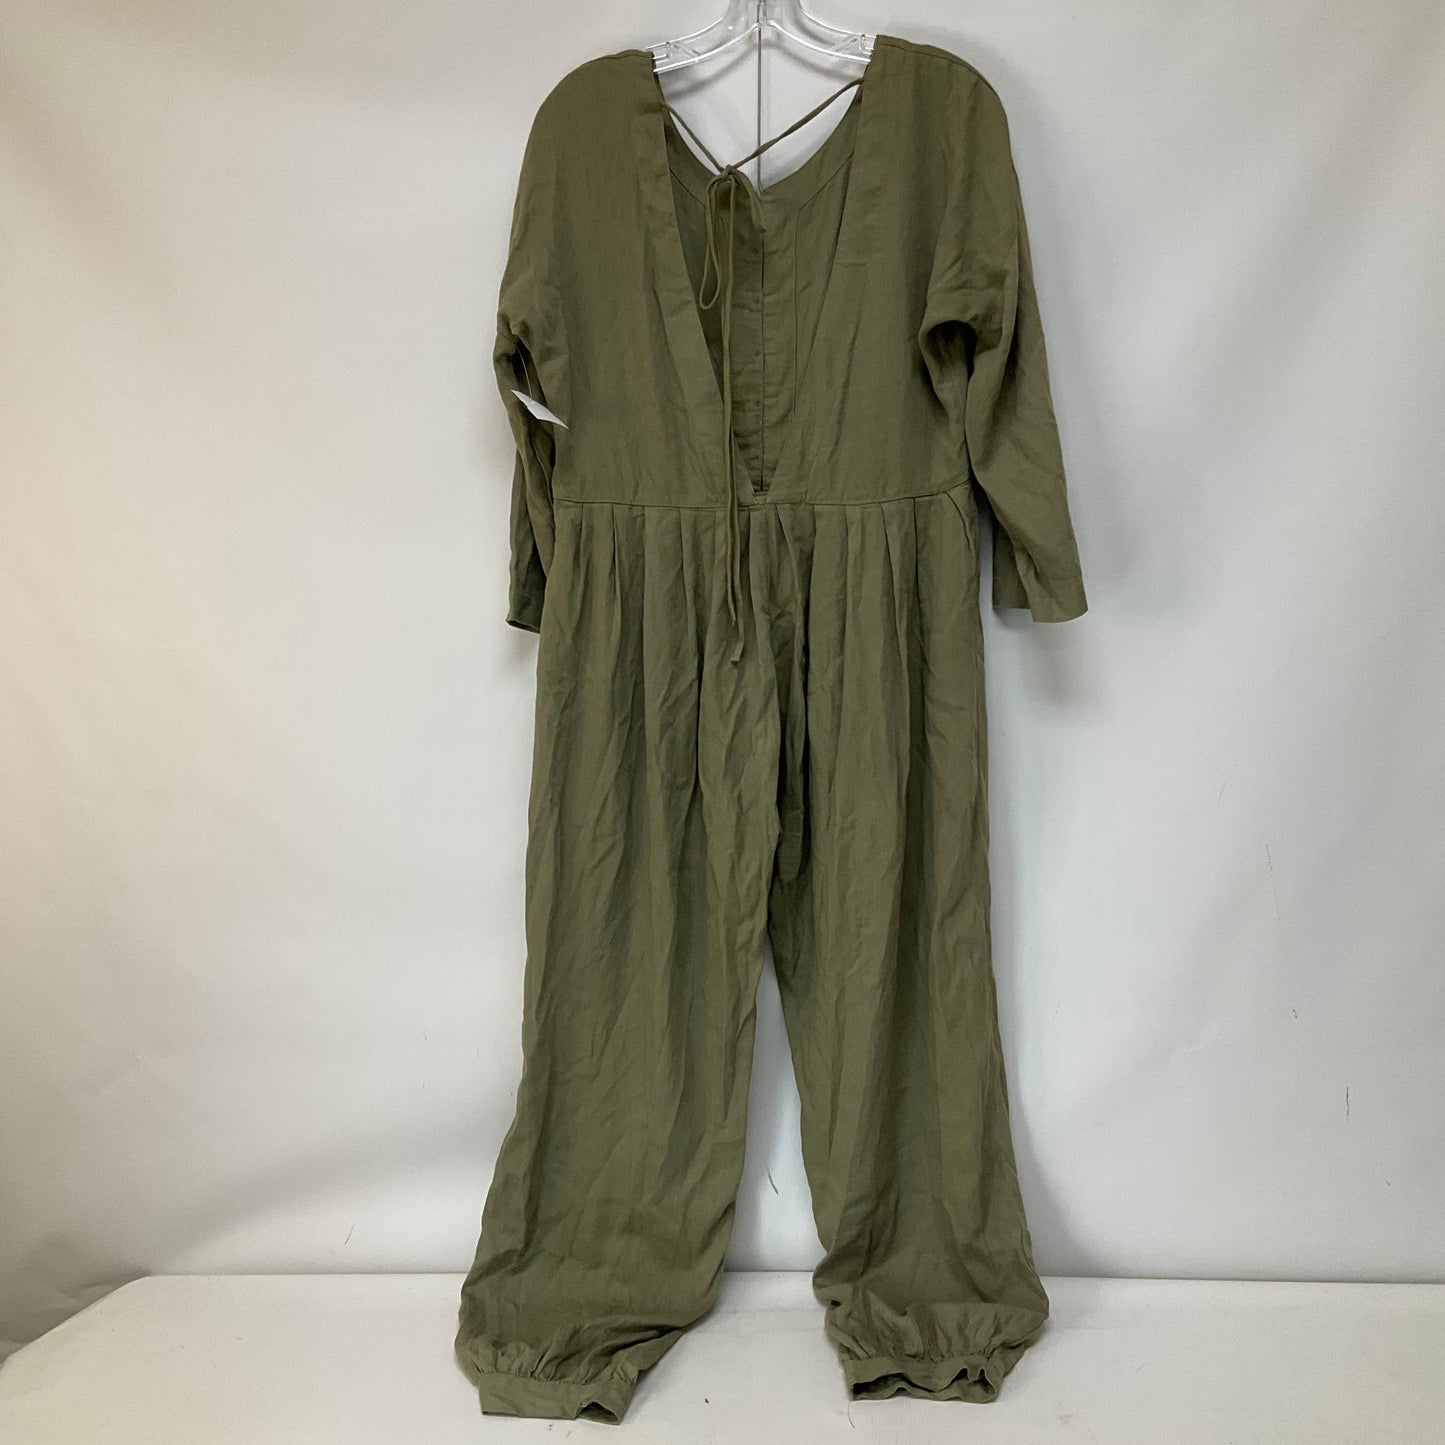 Green Jumpsuit Free People, Size S